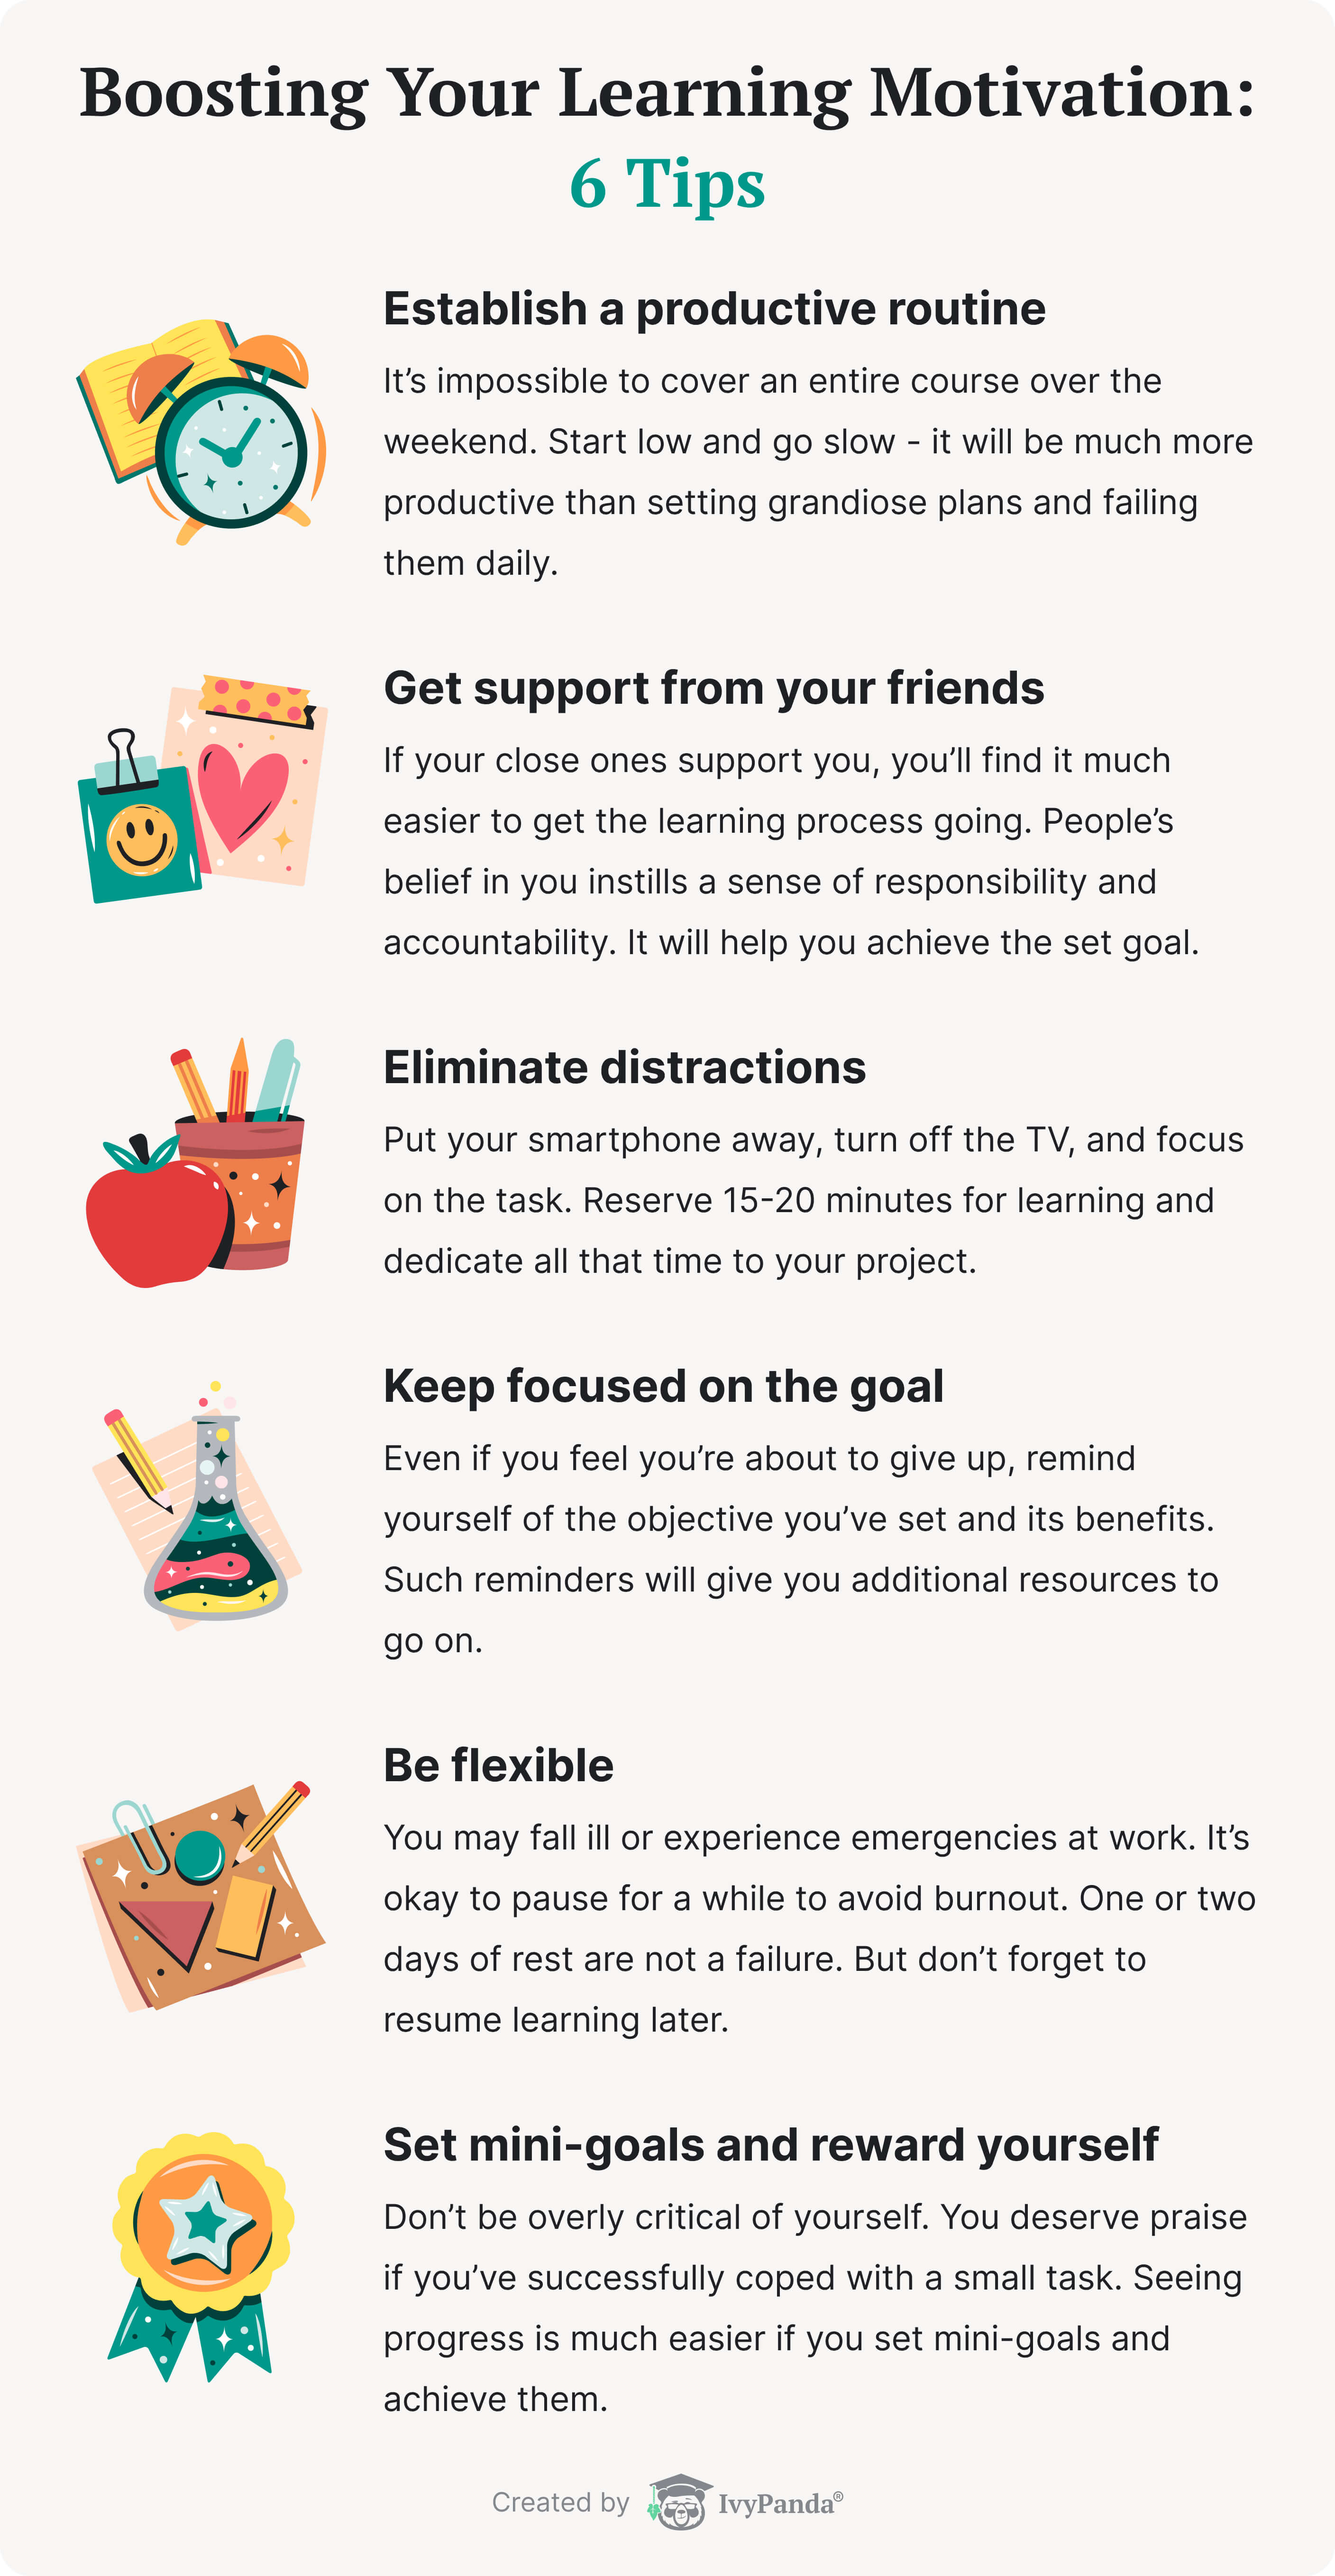 Tips on boosting your learning motivation.